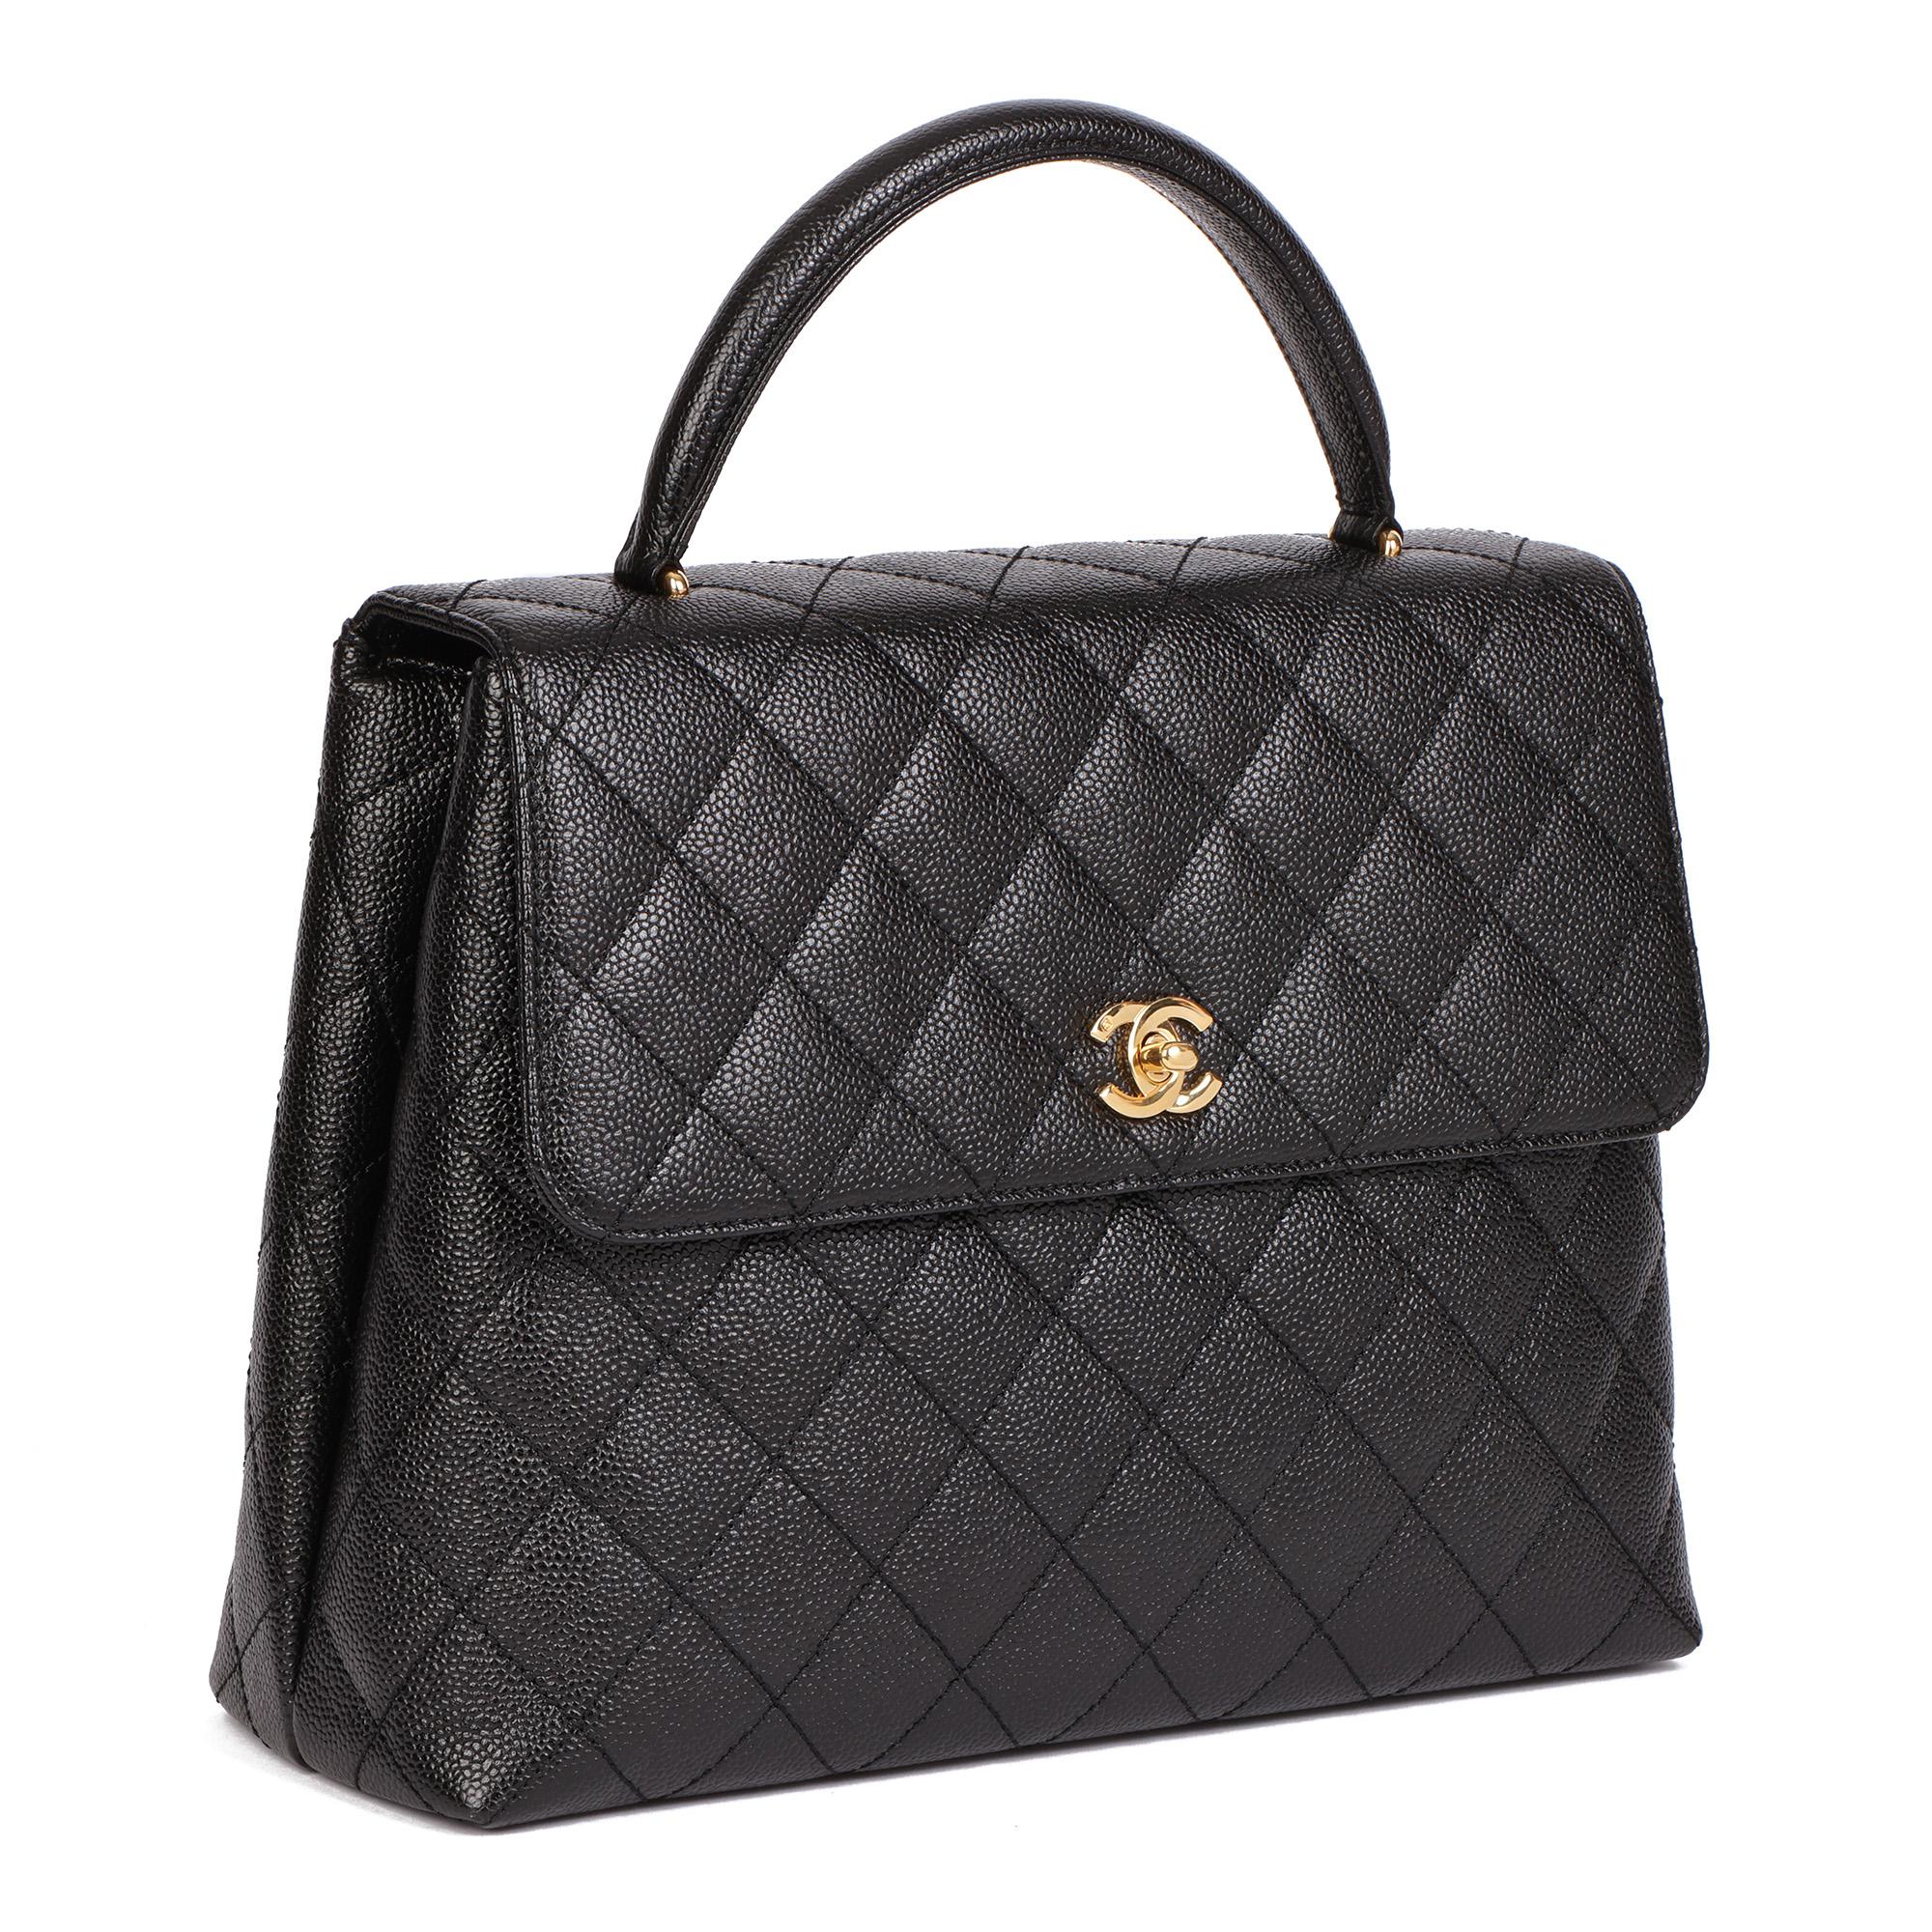 CHANEL
Black Quilted Caviar Leather Classic Kelly

Serial Number: 9100977
Age (Circa): 2004
Accompanied By: Chanel Dust Bag, Authenticity Card, Care Booklet
Authenticity Details: Authenticity Card, Serial Sticker (Italy)
Gender: Ladies
Type: Top